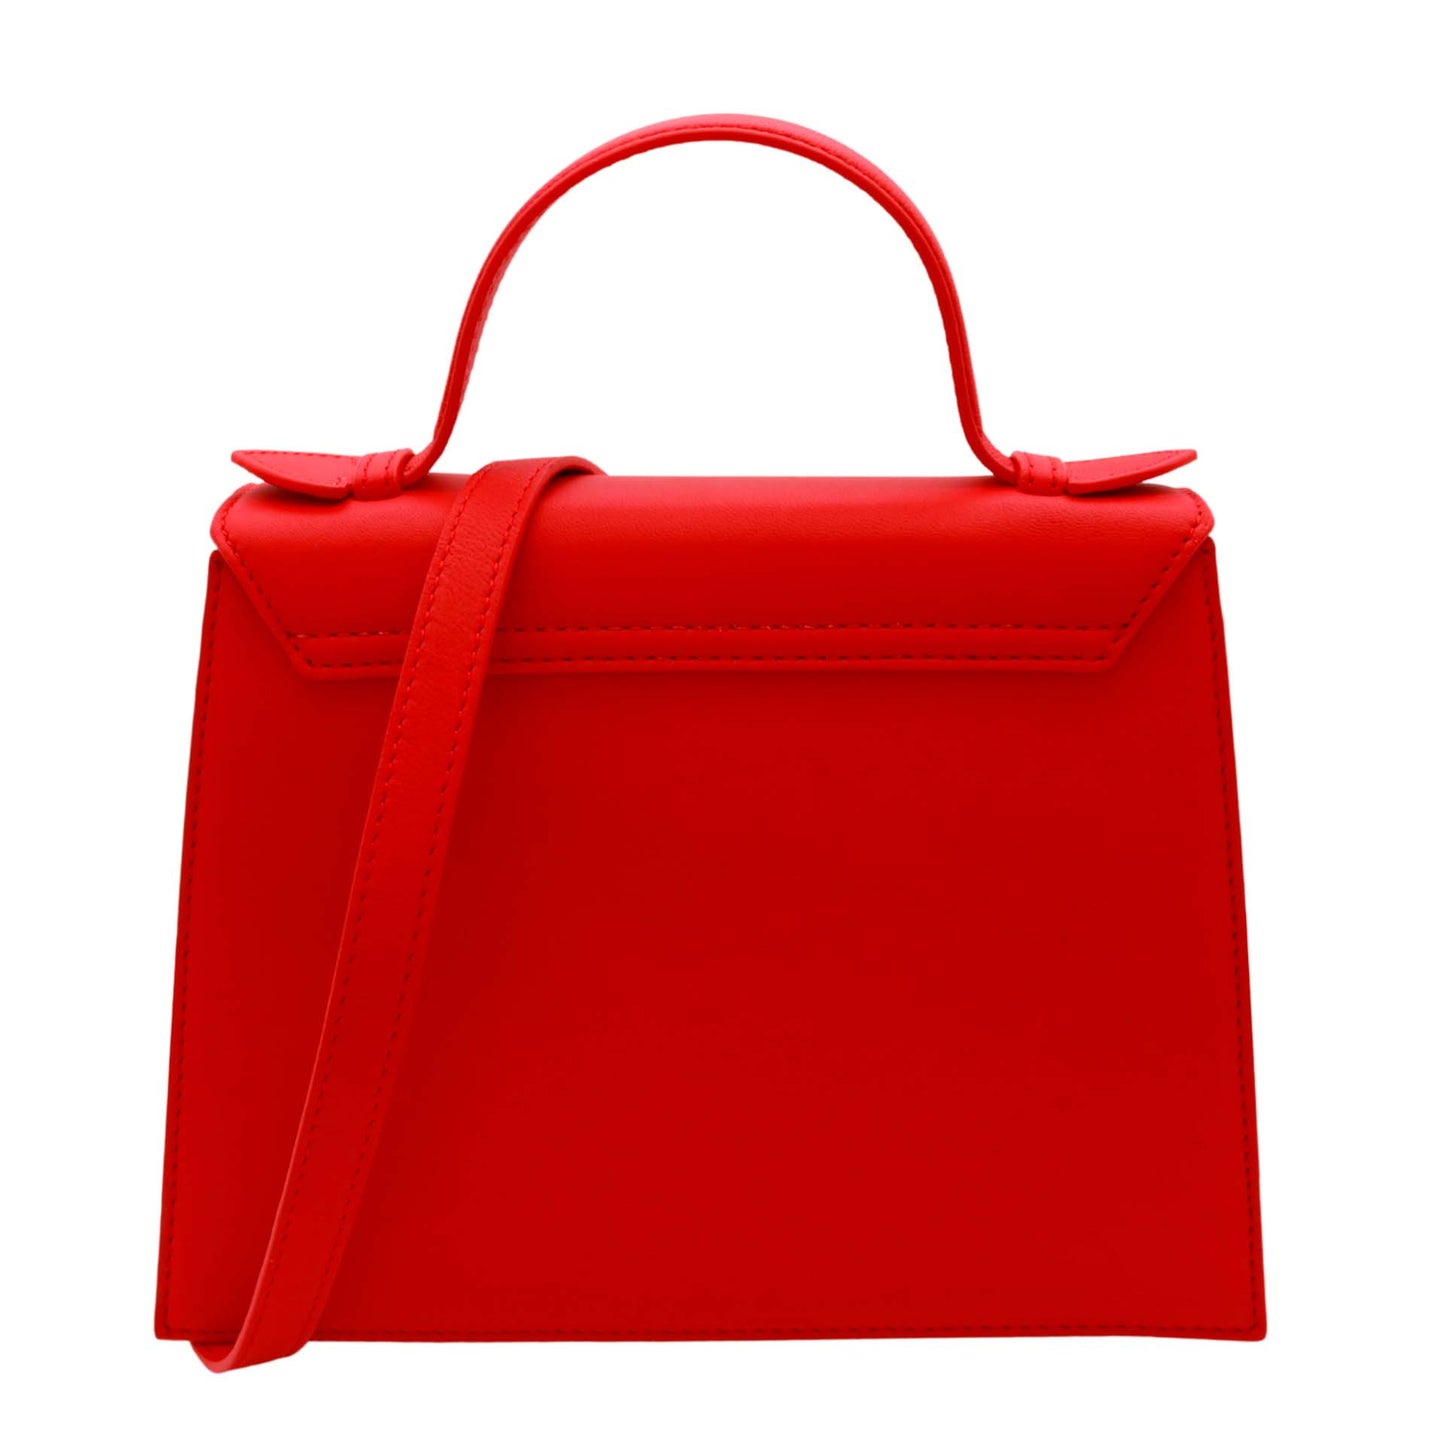 the-penelope-hand-bag-chili-red